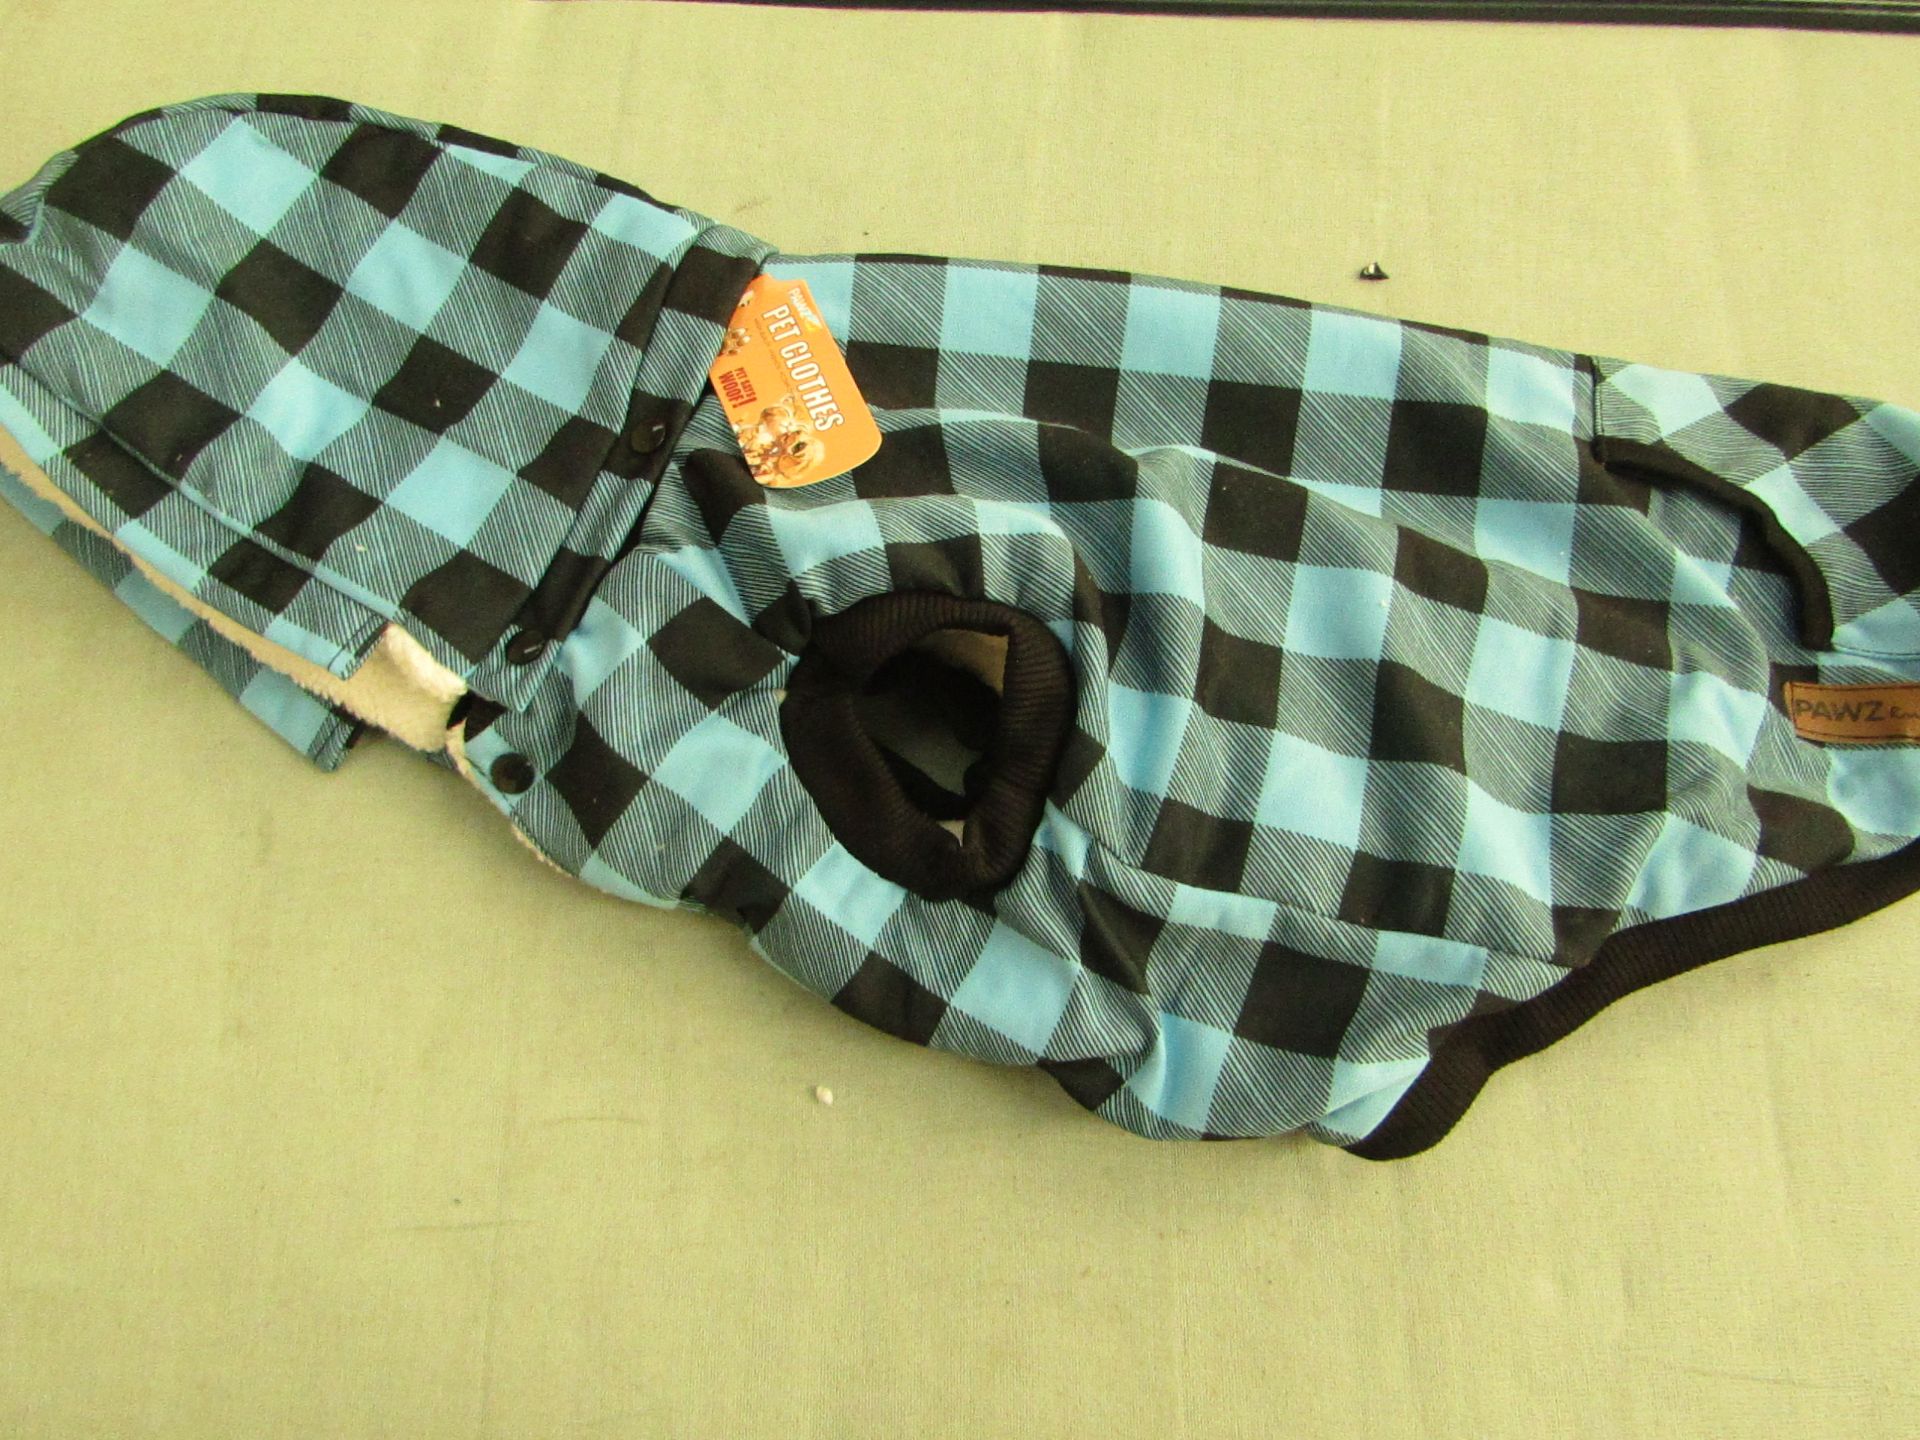 Pawz - Plaid Dog Coat - Size L - Please See Image For Design - Unused & Packaged.